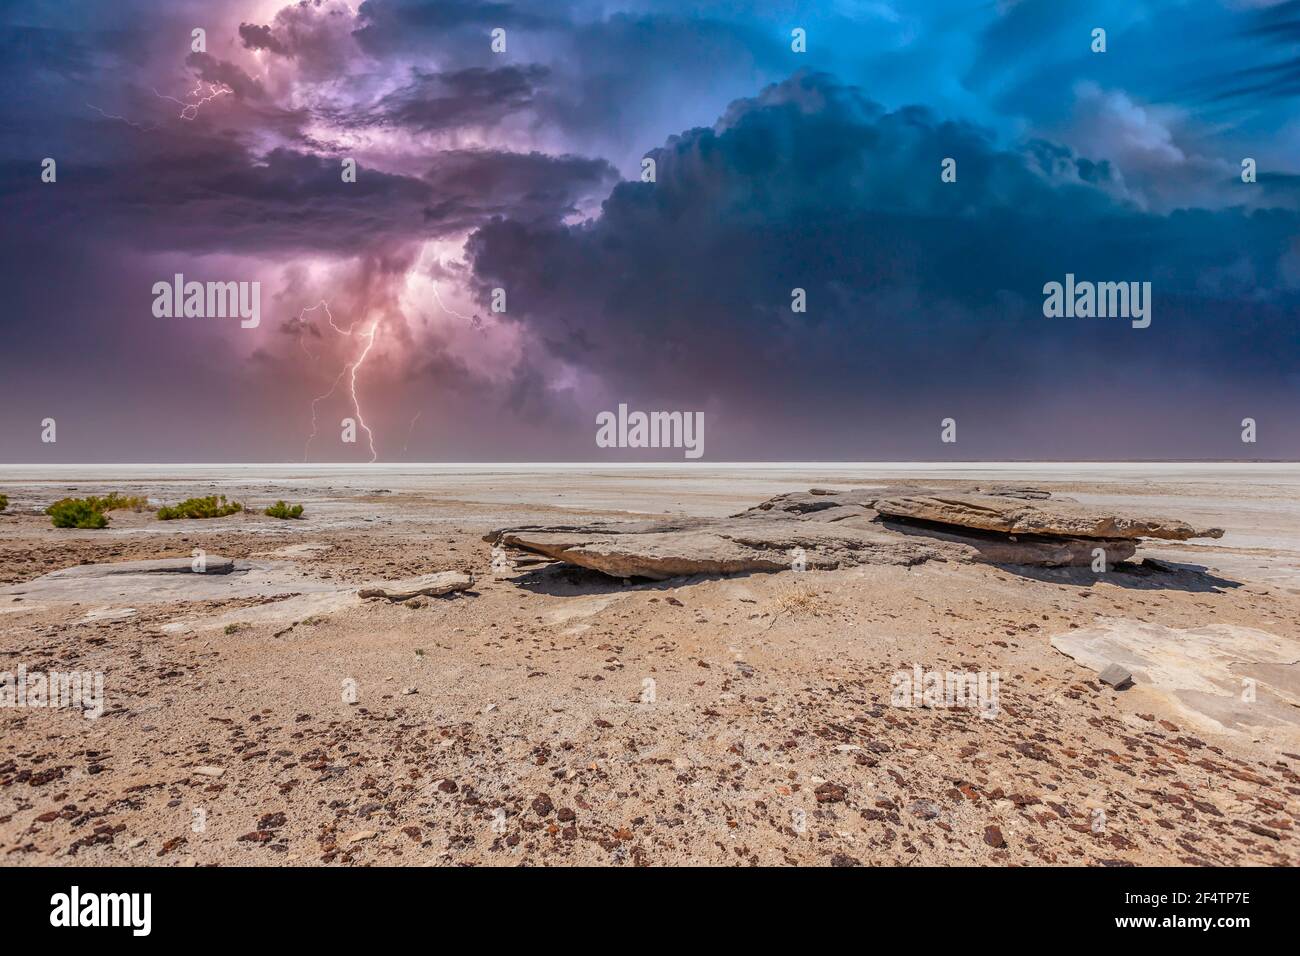 Heavy thunderstorm with bright white purple lightning over Kati Thanda – Lake Eyre in the deserts of central Australia just in Northern South Australi Stock Photo